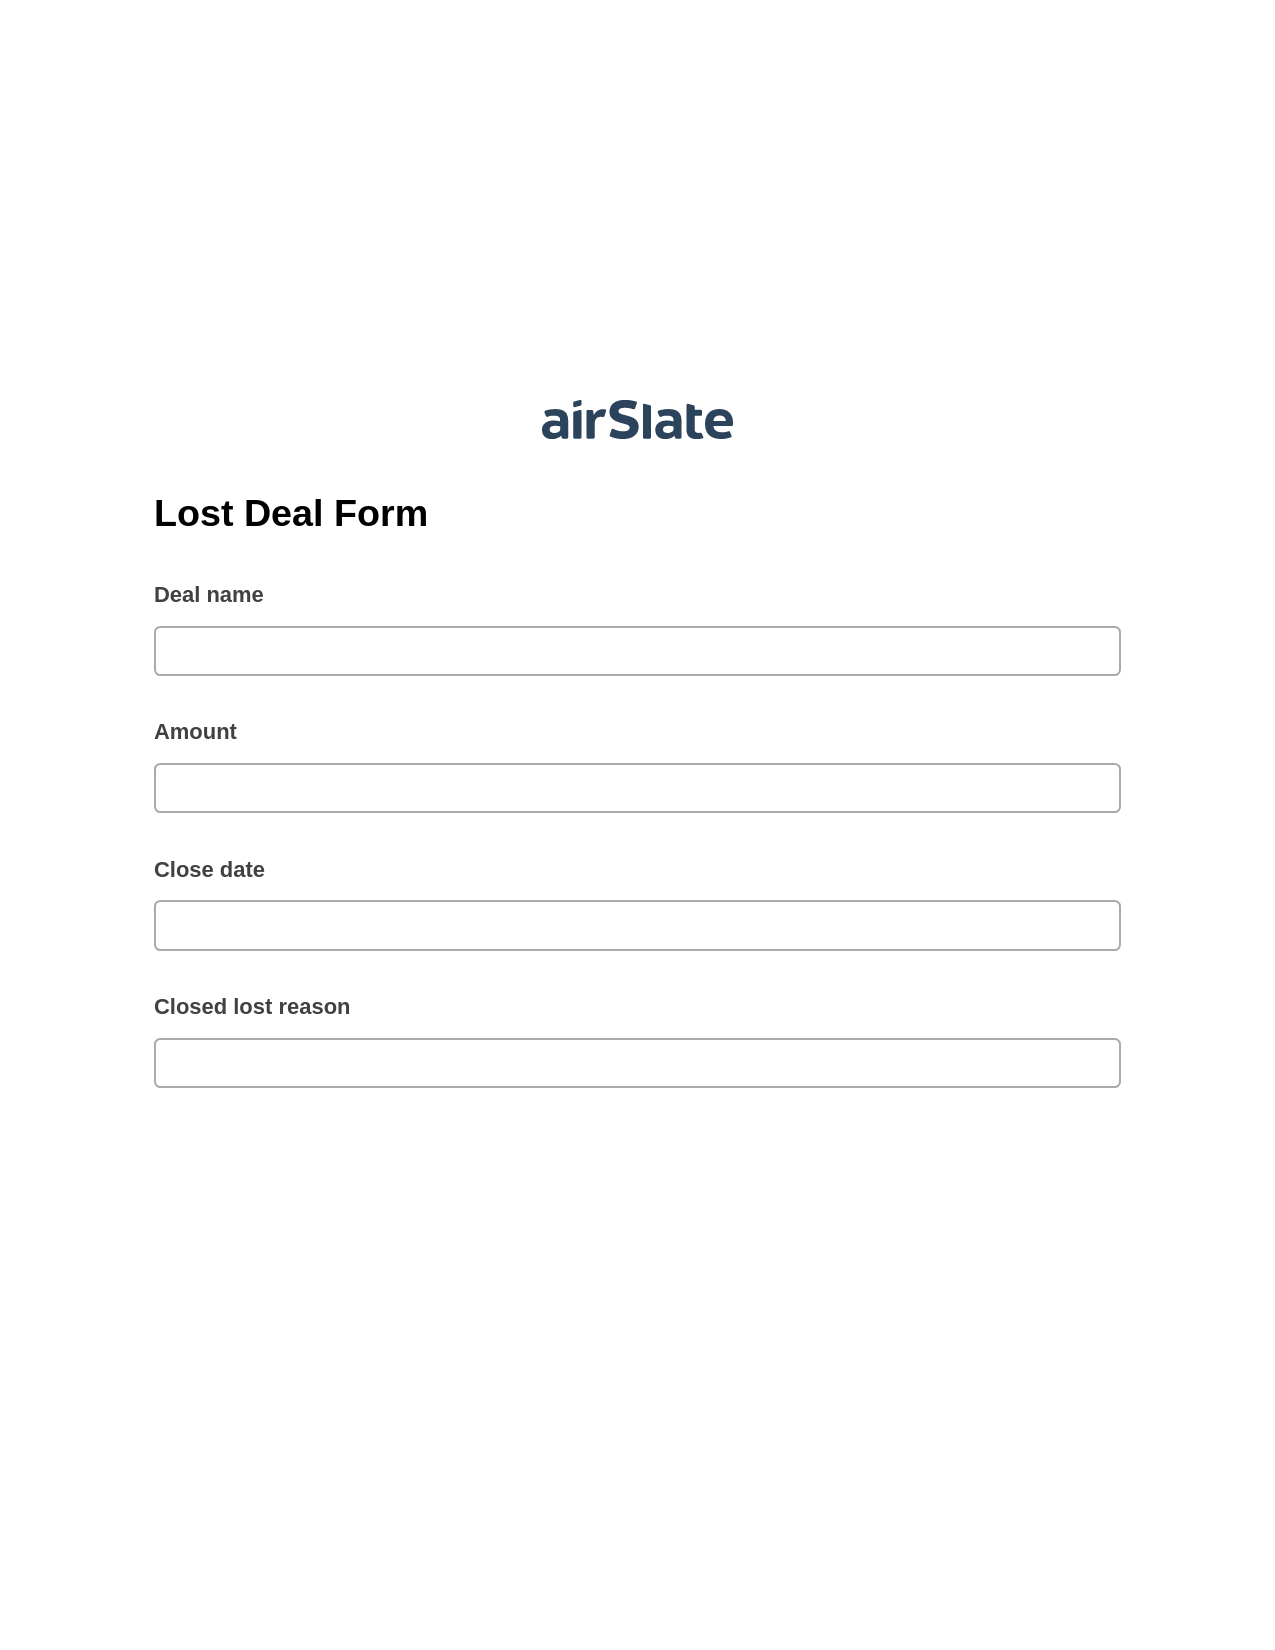 Lost Deal Form Pre-fill Document Bot, Slack Notification Bot, Archive to SharePoint Folder Bot